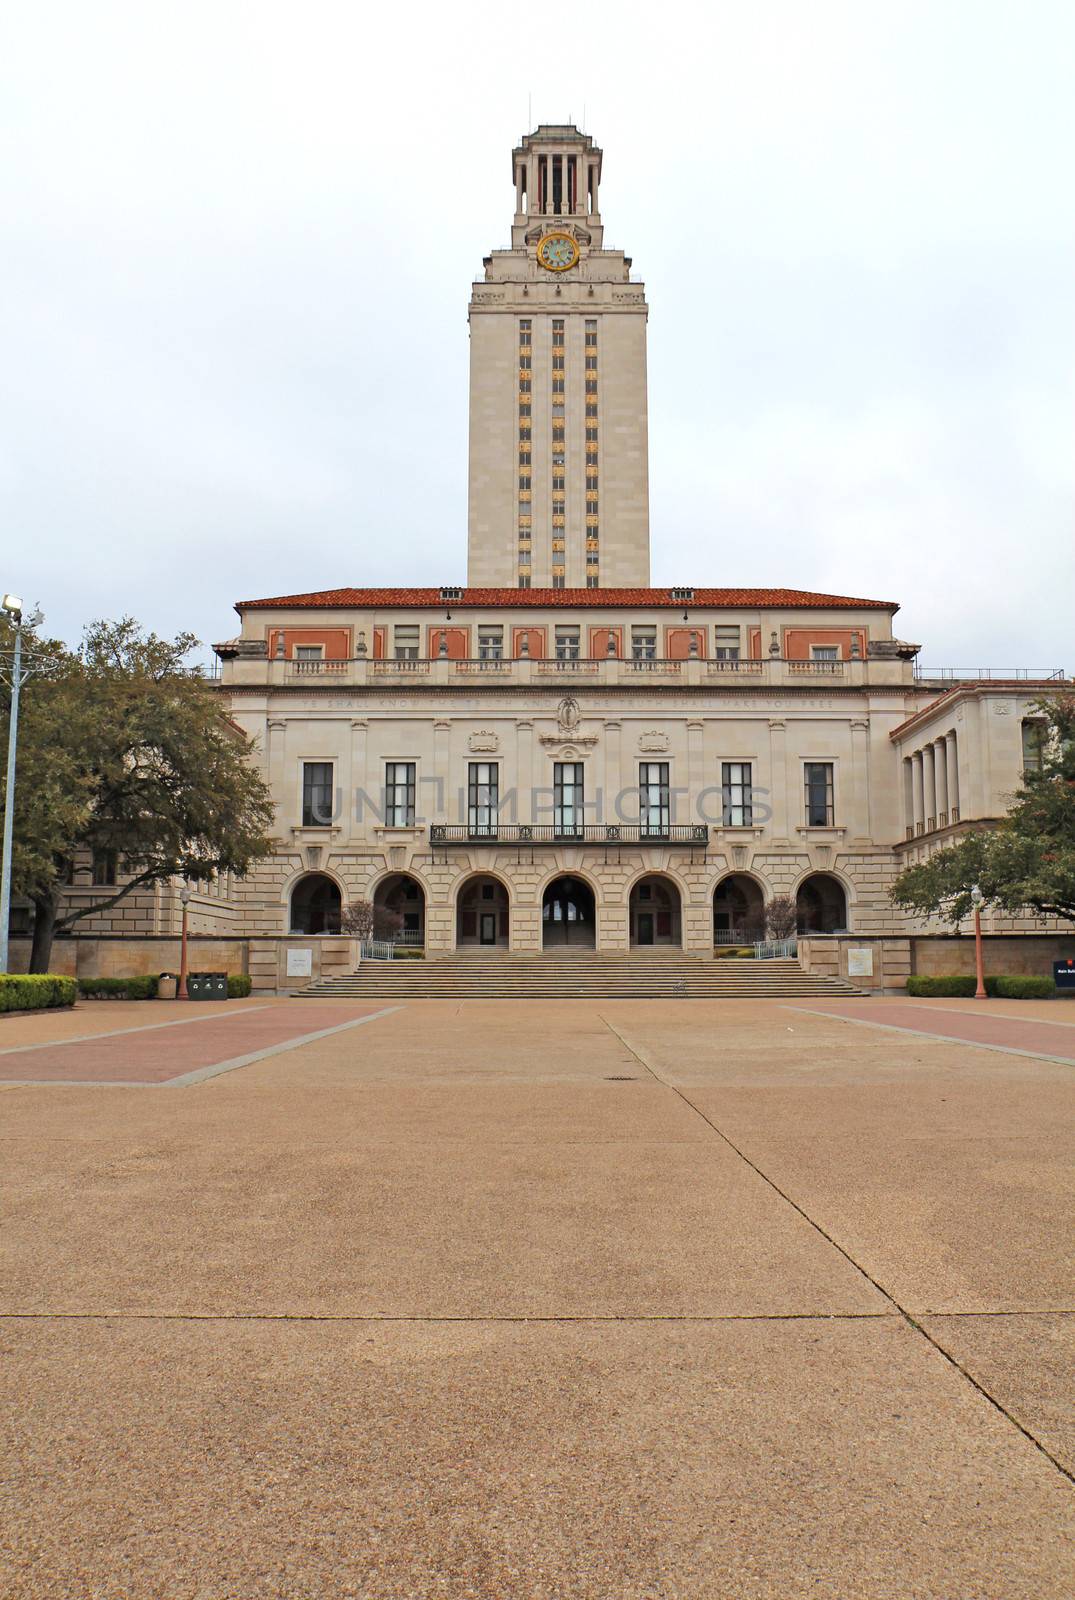 Main Building on the University of Texas at Austin campus vertic by sgoodwin4813